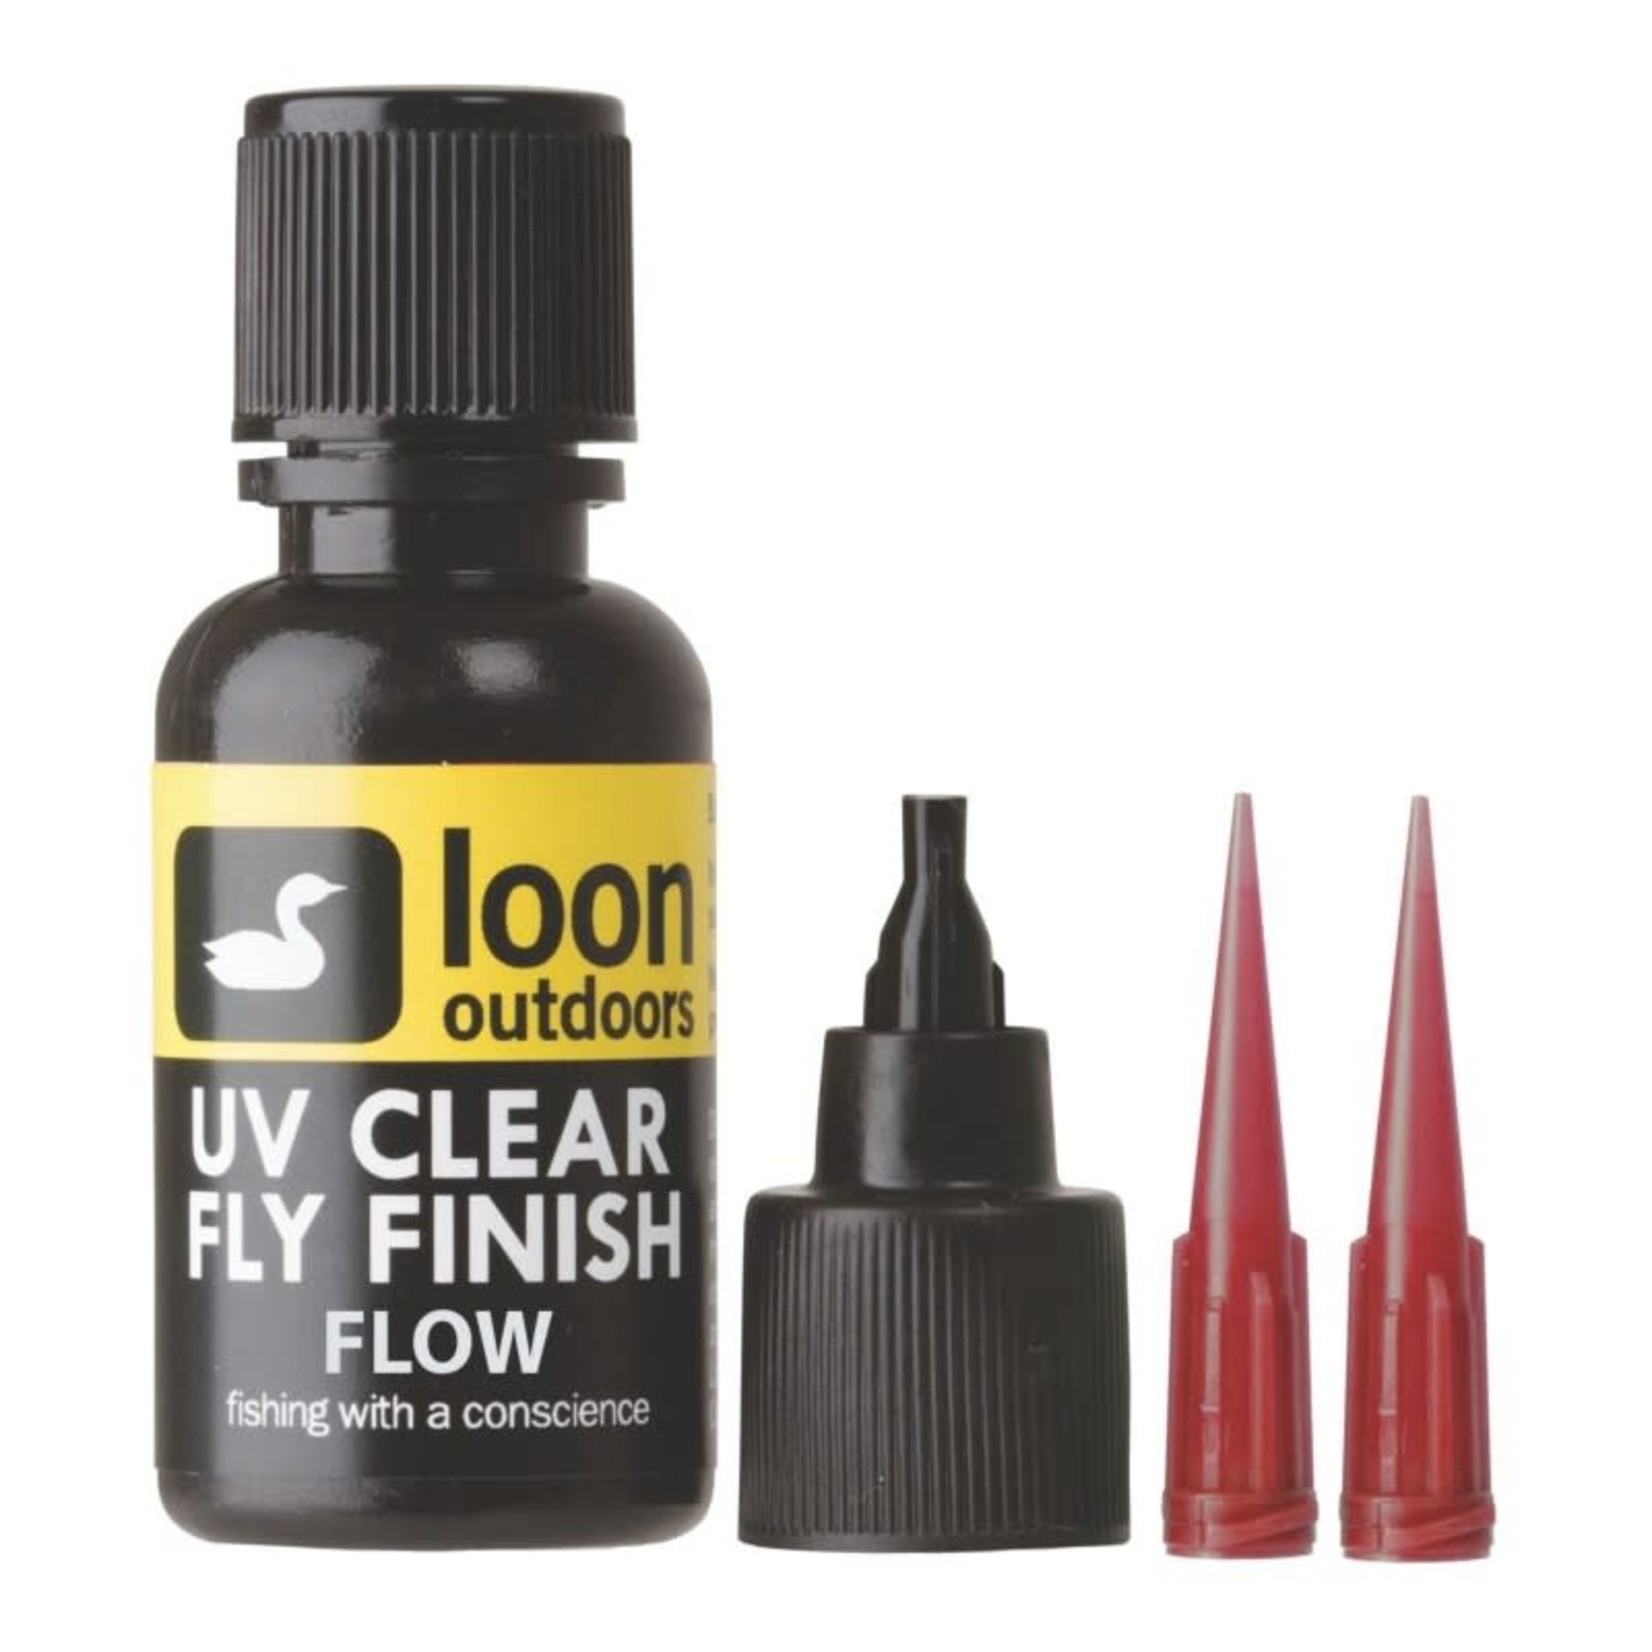 LOON OUTDOORS Loon Outdoors UV Clear Fly Finish, Flow - 0.5 fl oz bottle